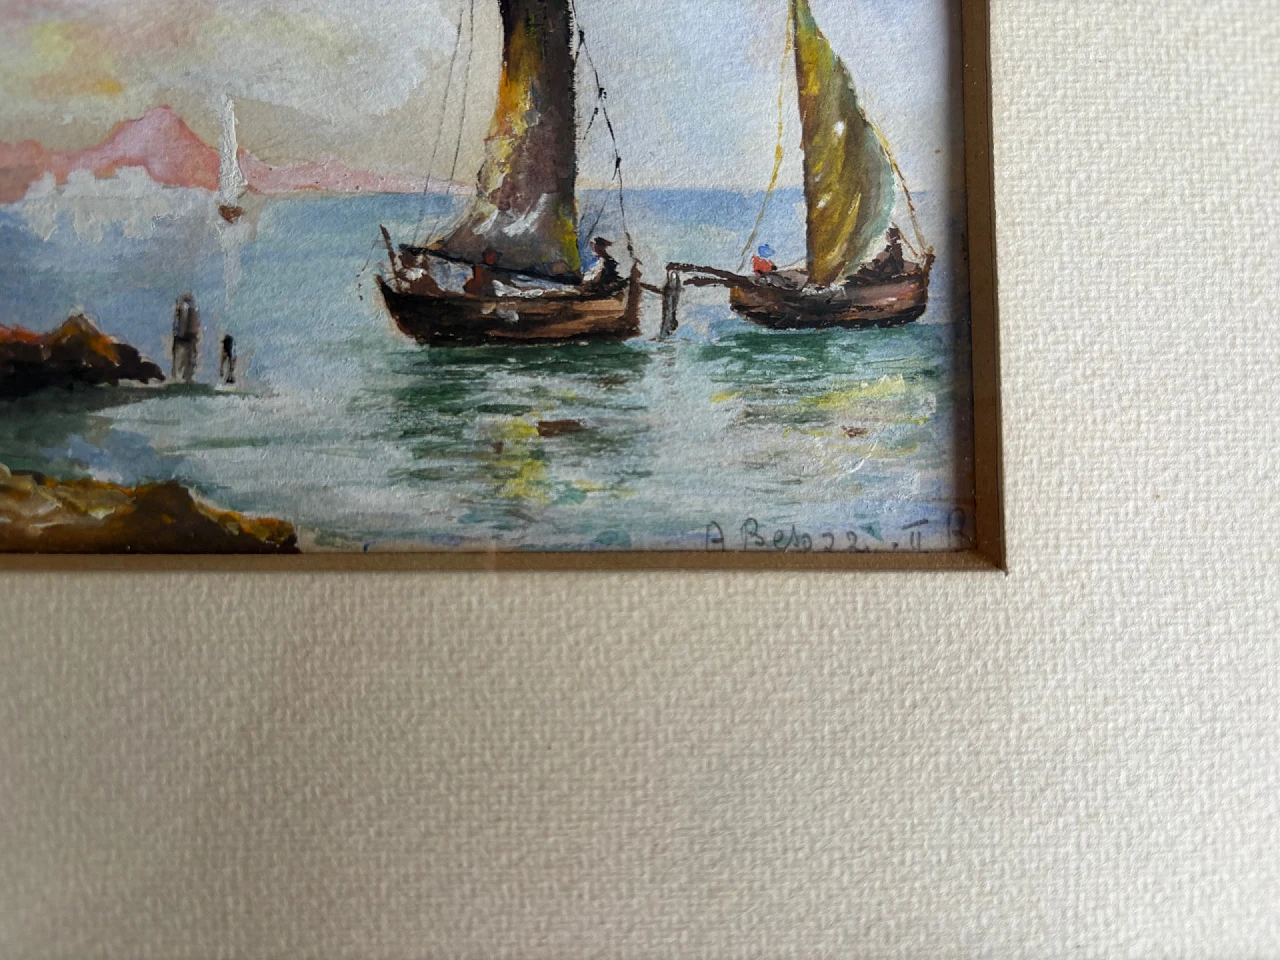 A. Besozzi, seascape with boats, painting, 1930s 2